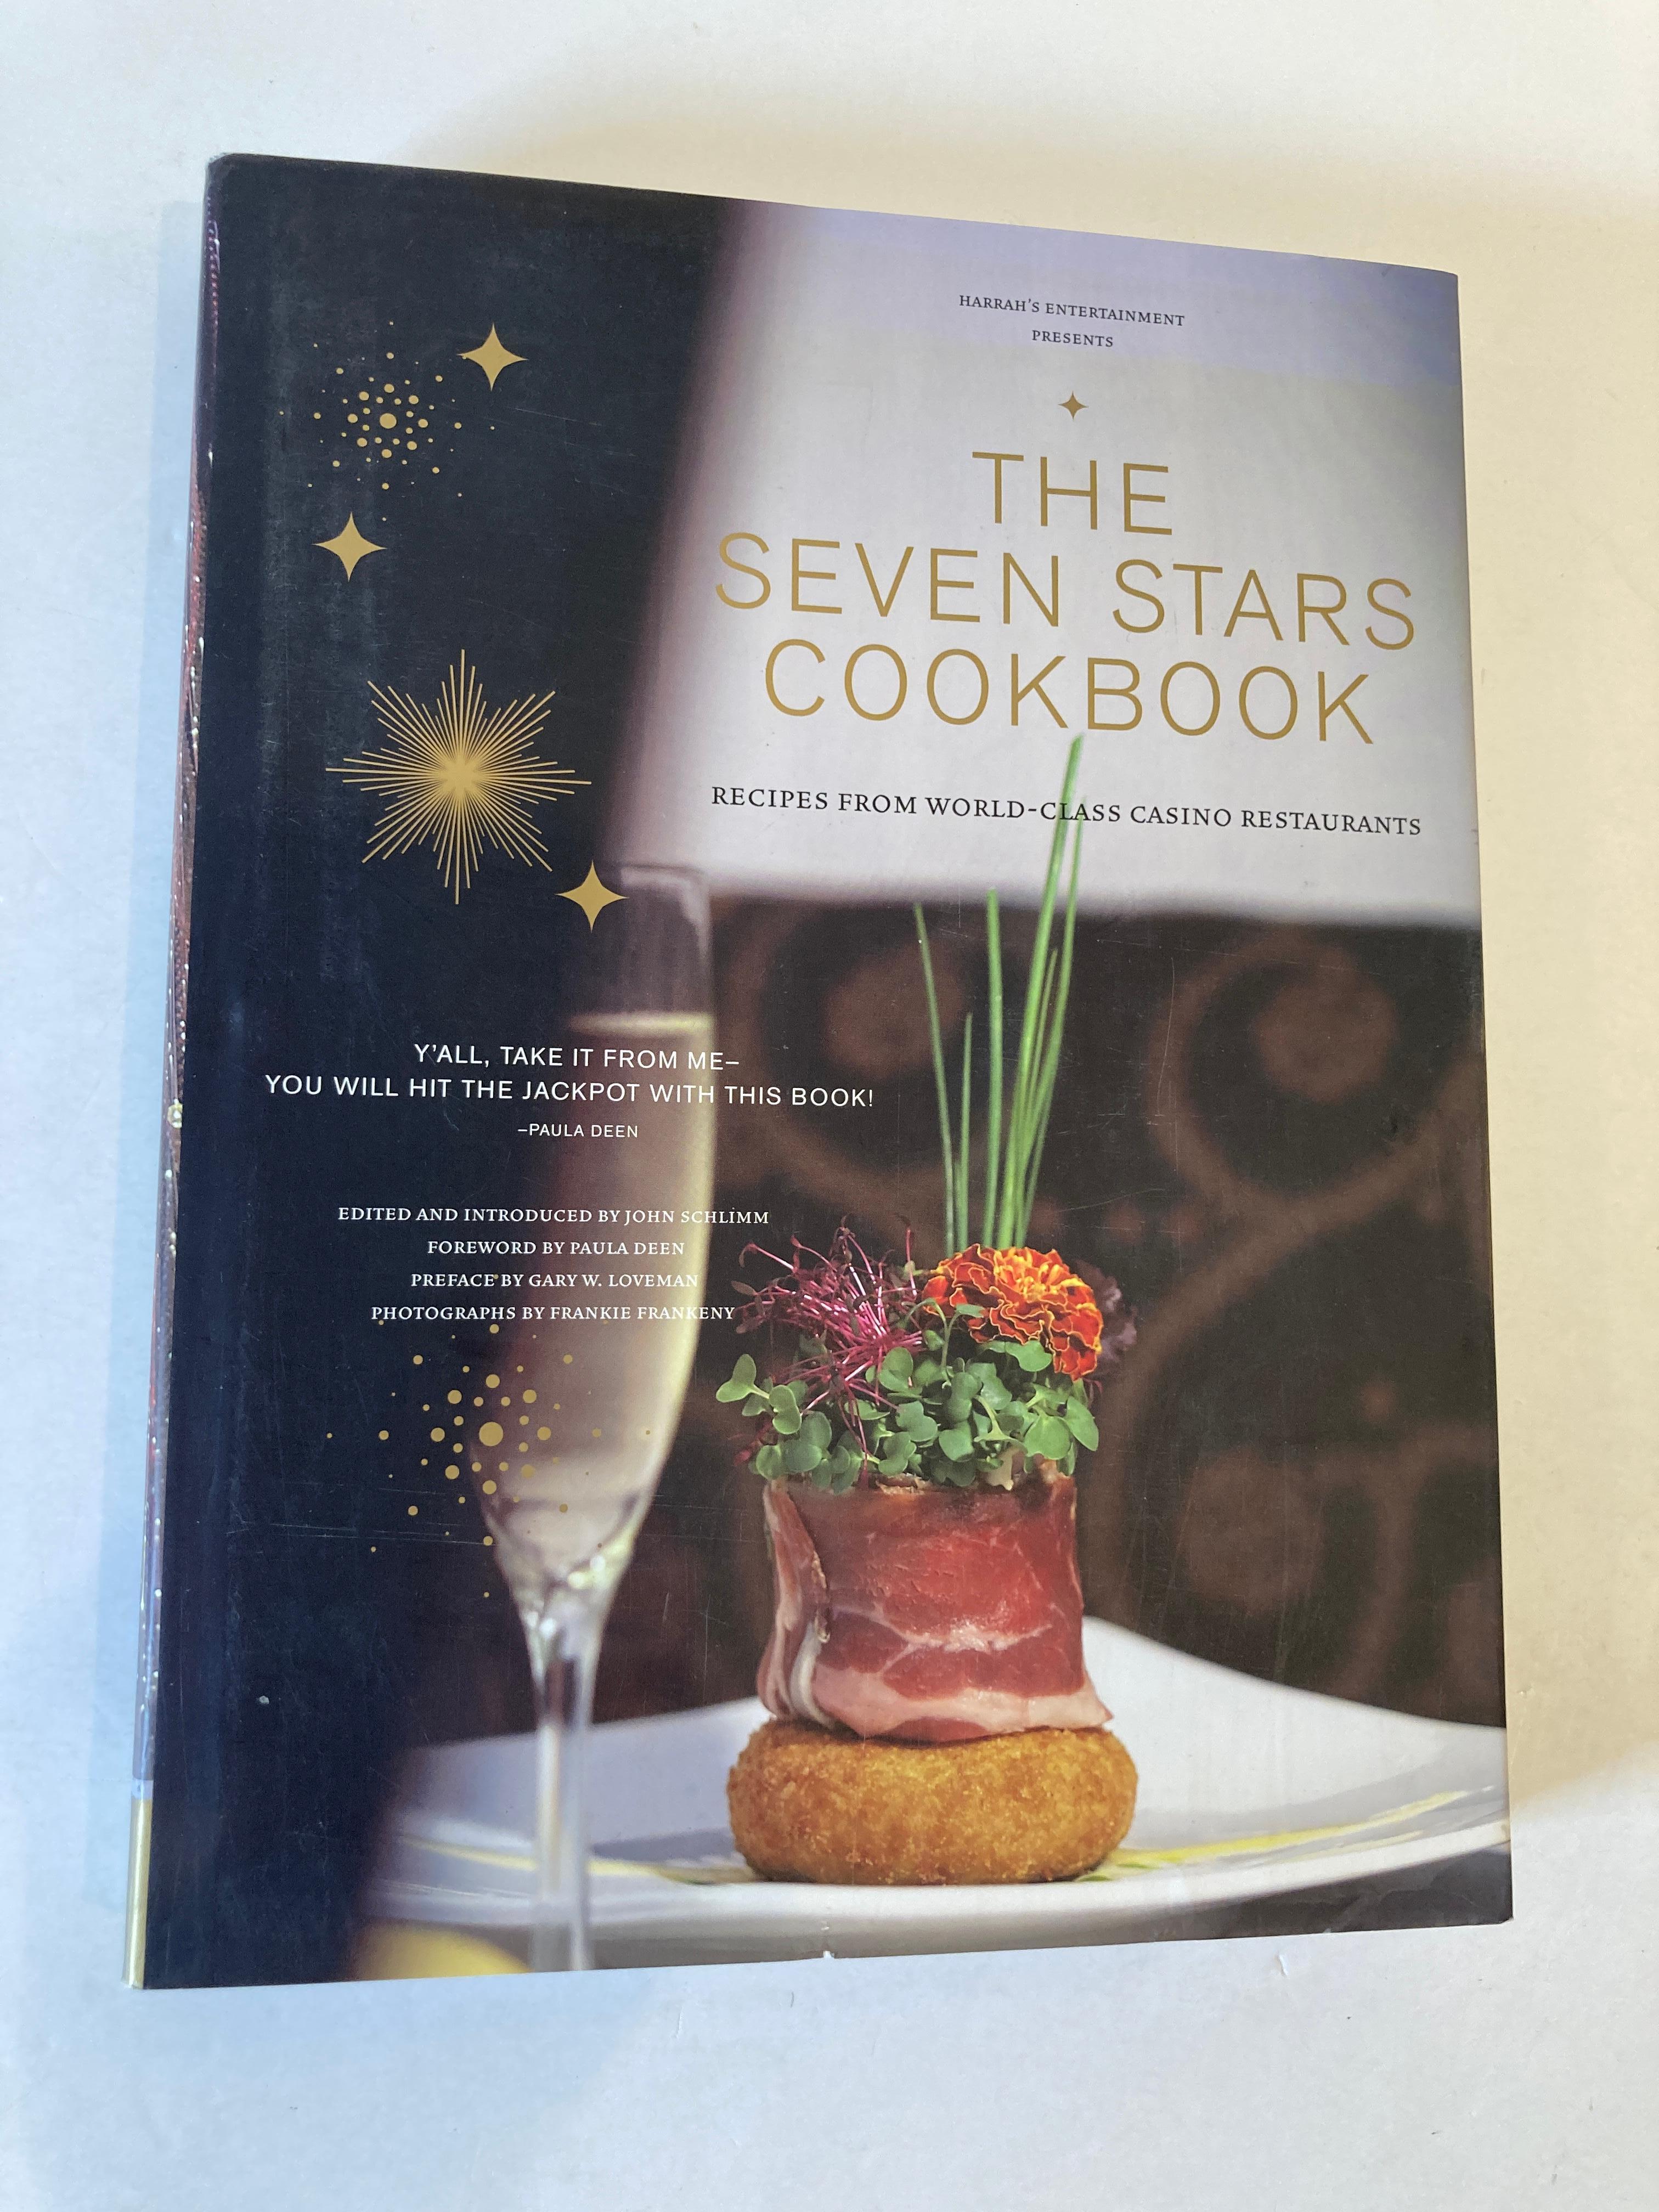 The Seven Stars Cookbook: Recipes from World-Class Casino Restaurants.
Harrah's Entertainment Presents The Seven Stars Cookbook: Recipes from World-Class Casino Restaurants.
John Schlimm
Chronicle Books, Jul 28, 2010 - Cooking - 320 pages
From